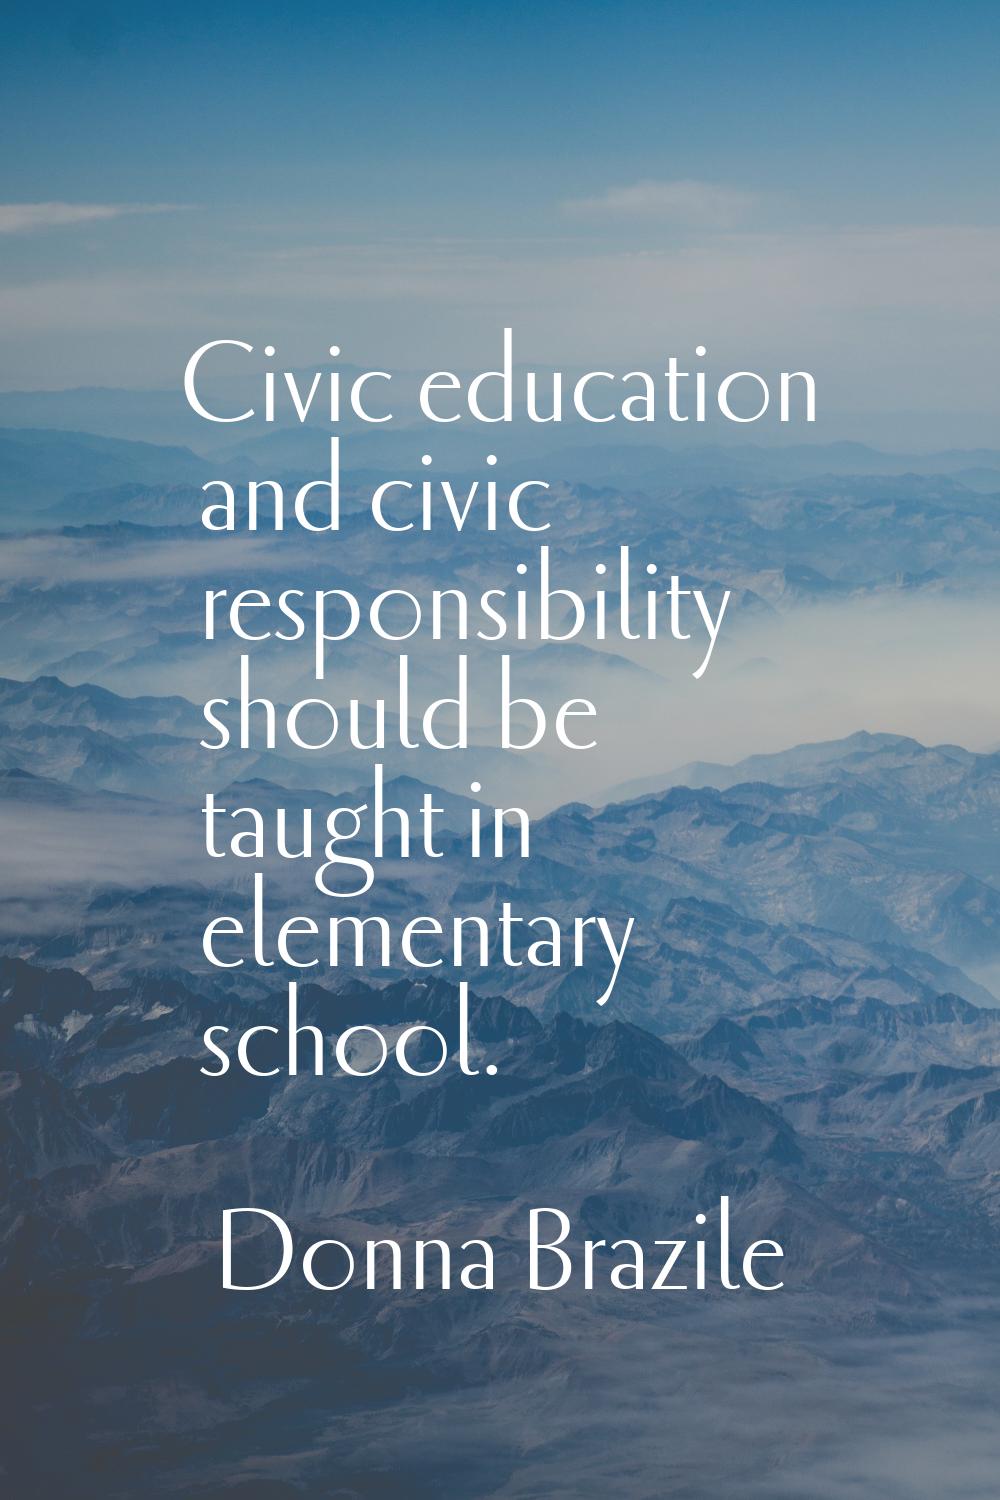 Civic education and civic responsibility should be taught in elementary school.